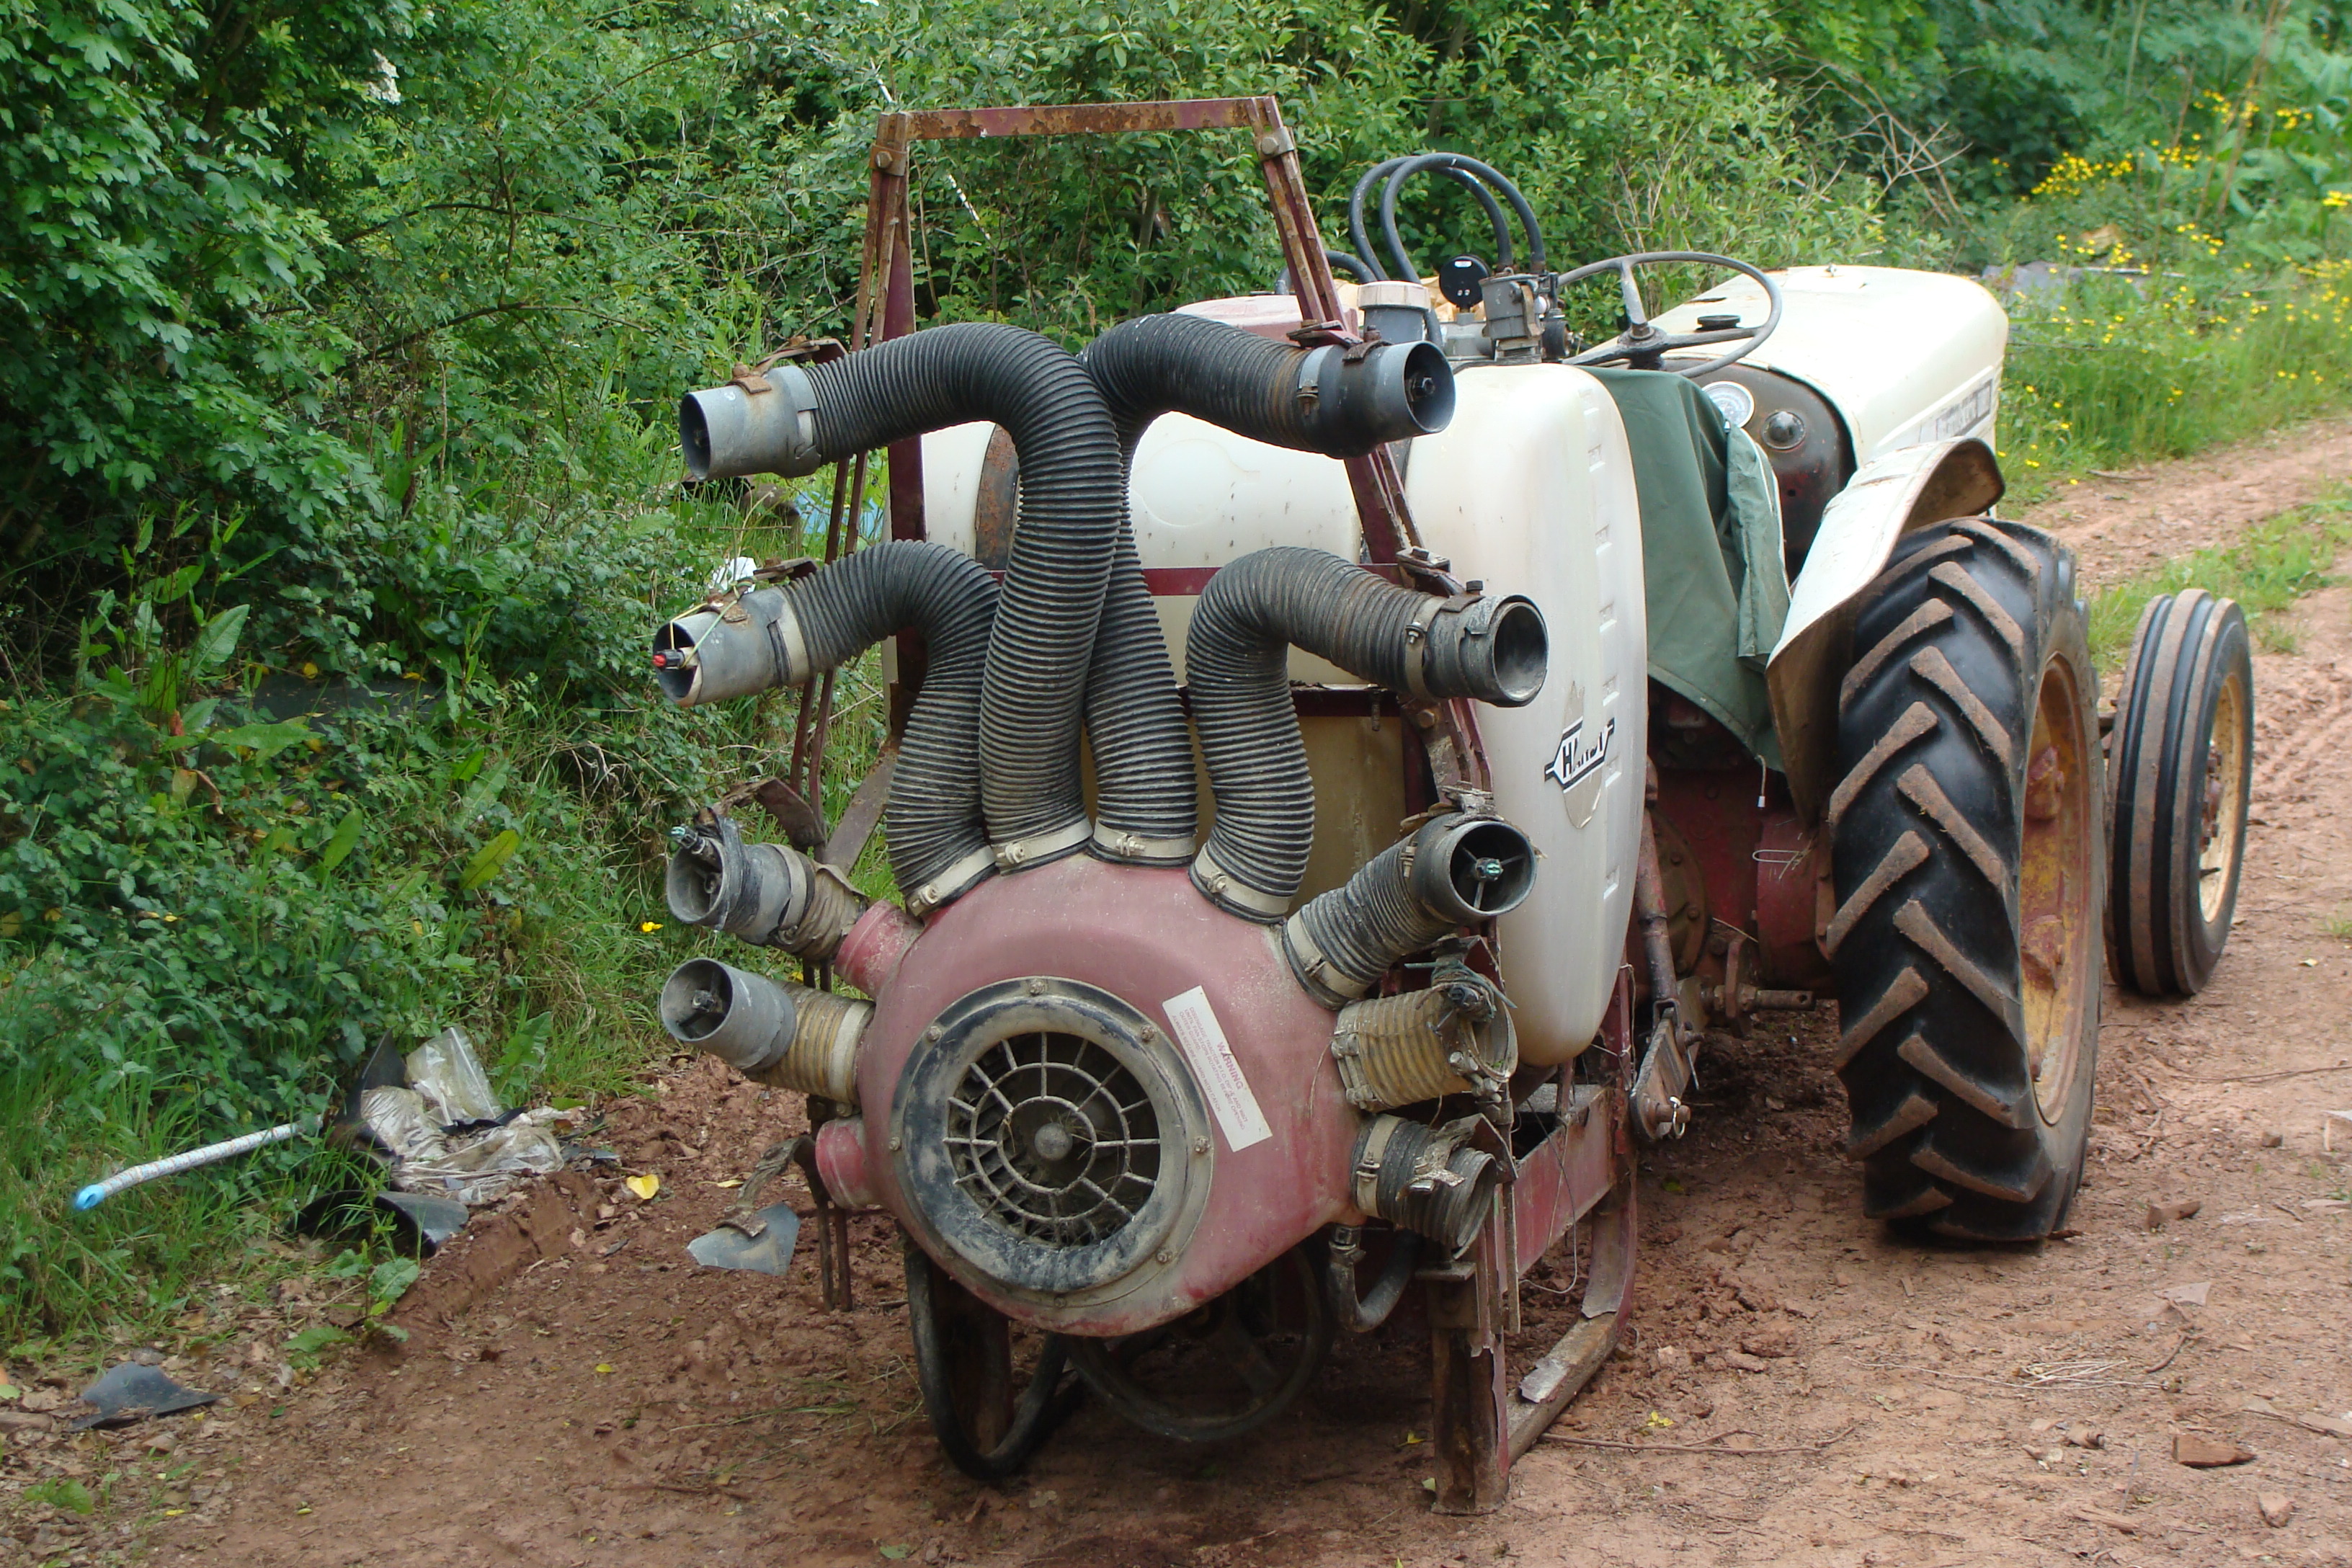 "A wine tractor"